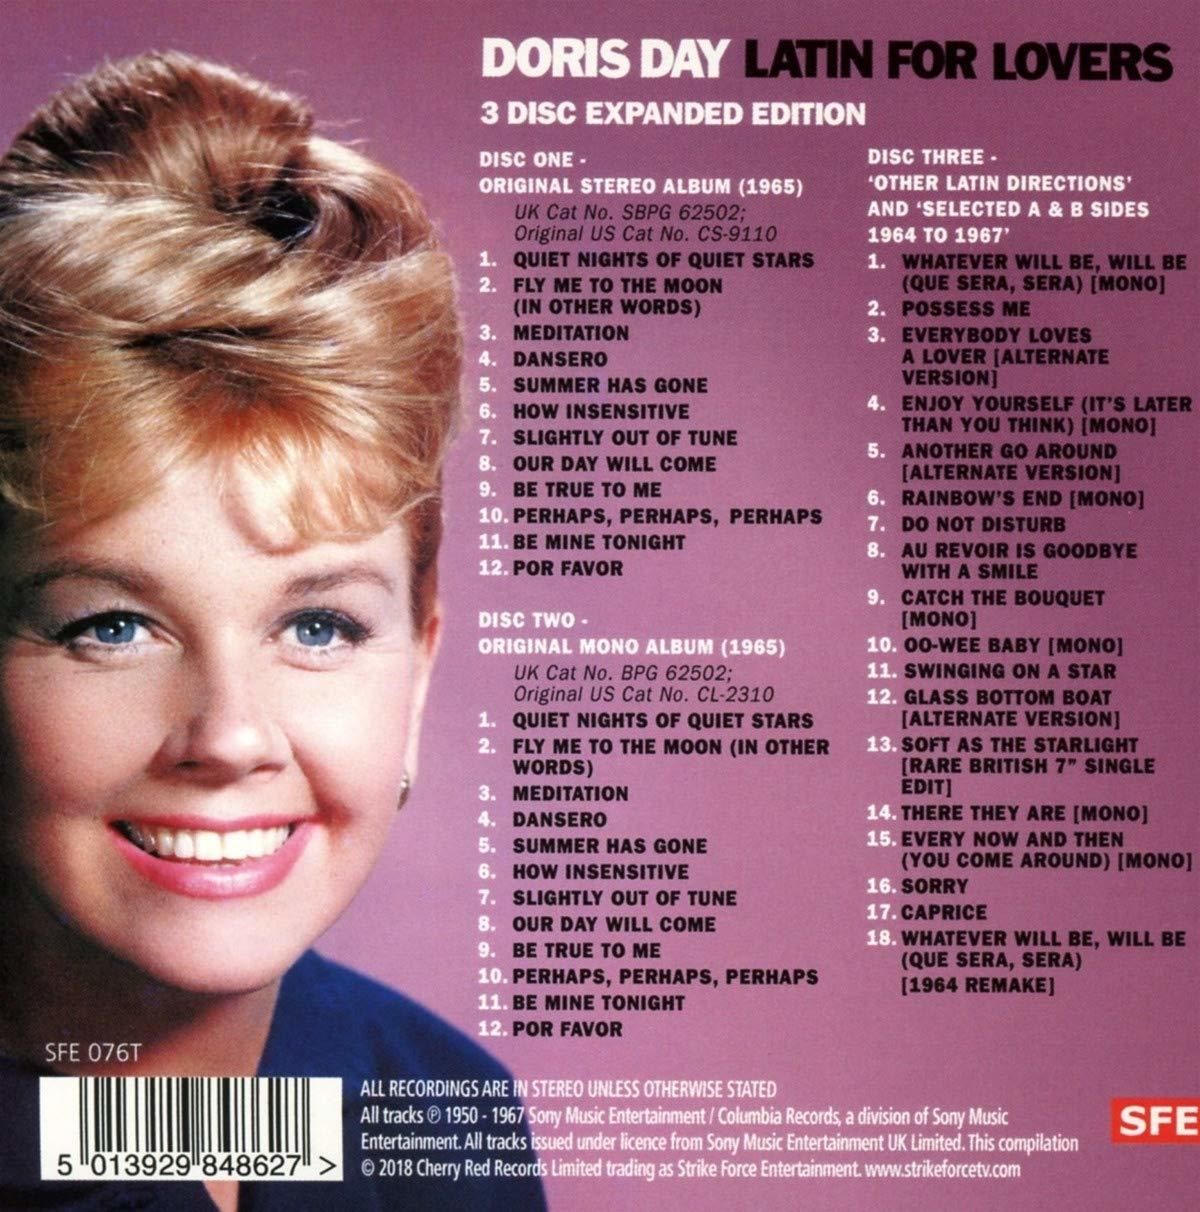 Latin Doris - Day (3 Edition) - (CD) For Lovers Digipak Expanded Disc